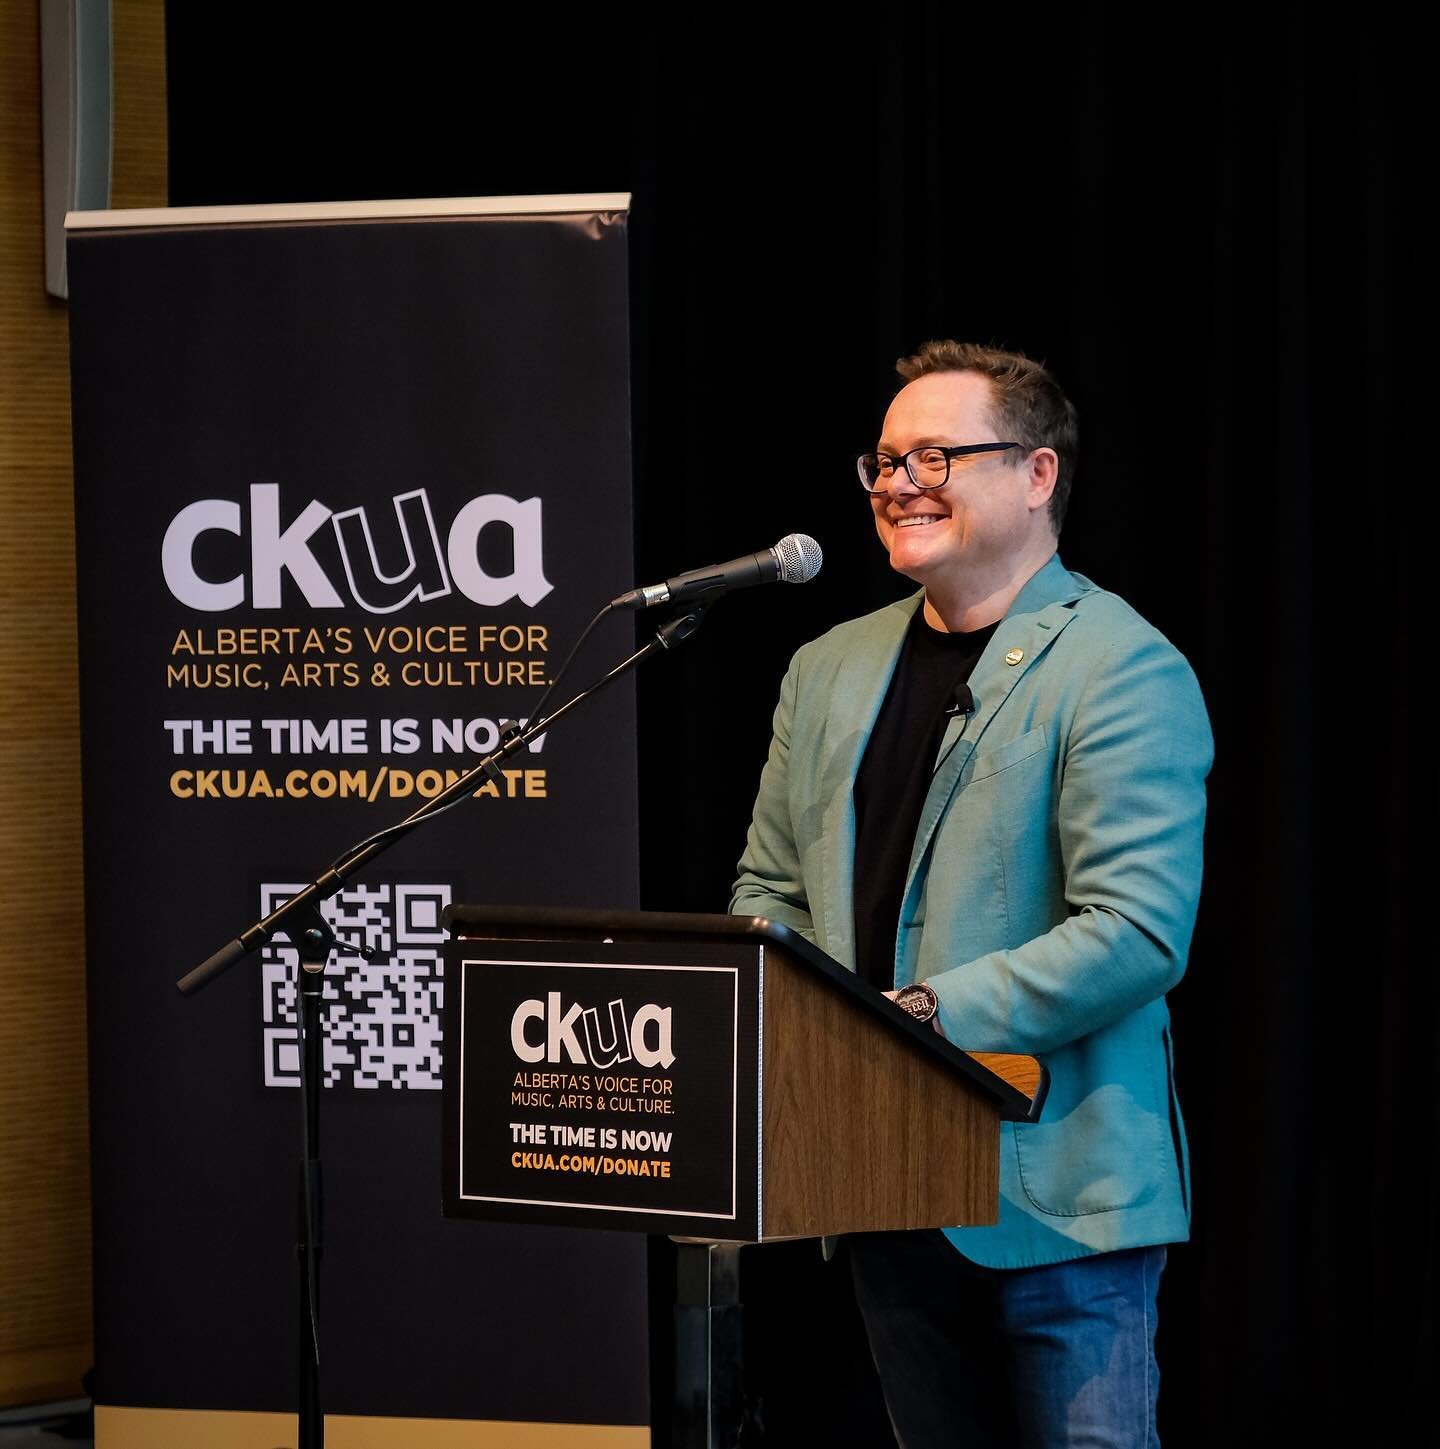 Friends, you all know of my love for CKUA Radio. I&rsquo;ve often said that having that joyful listening space as a constant during the pandemic saved my soul. It really did. 

I was invited to the press conference this morning which outlined next st